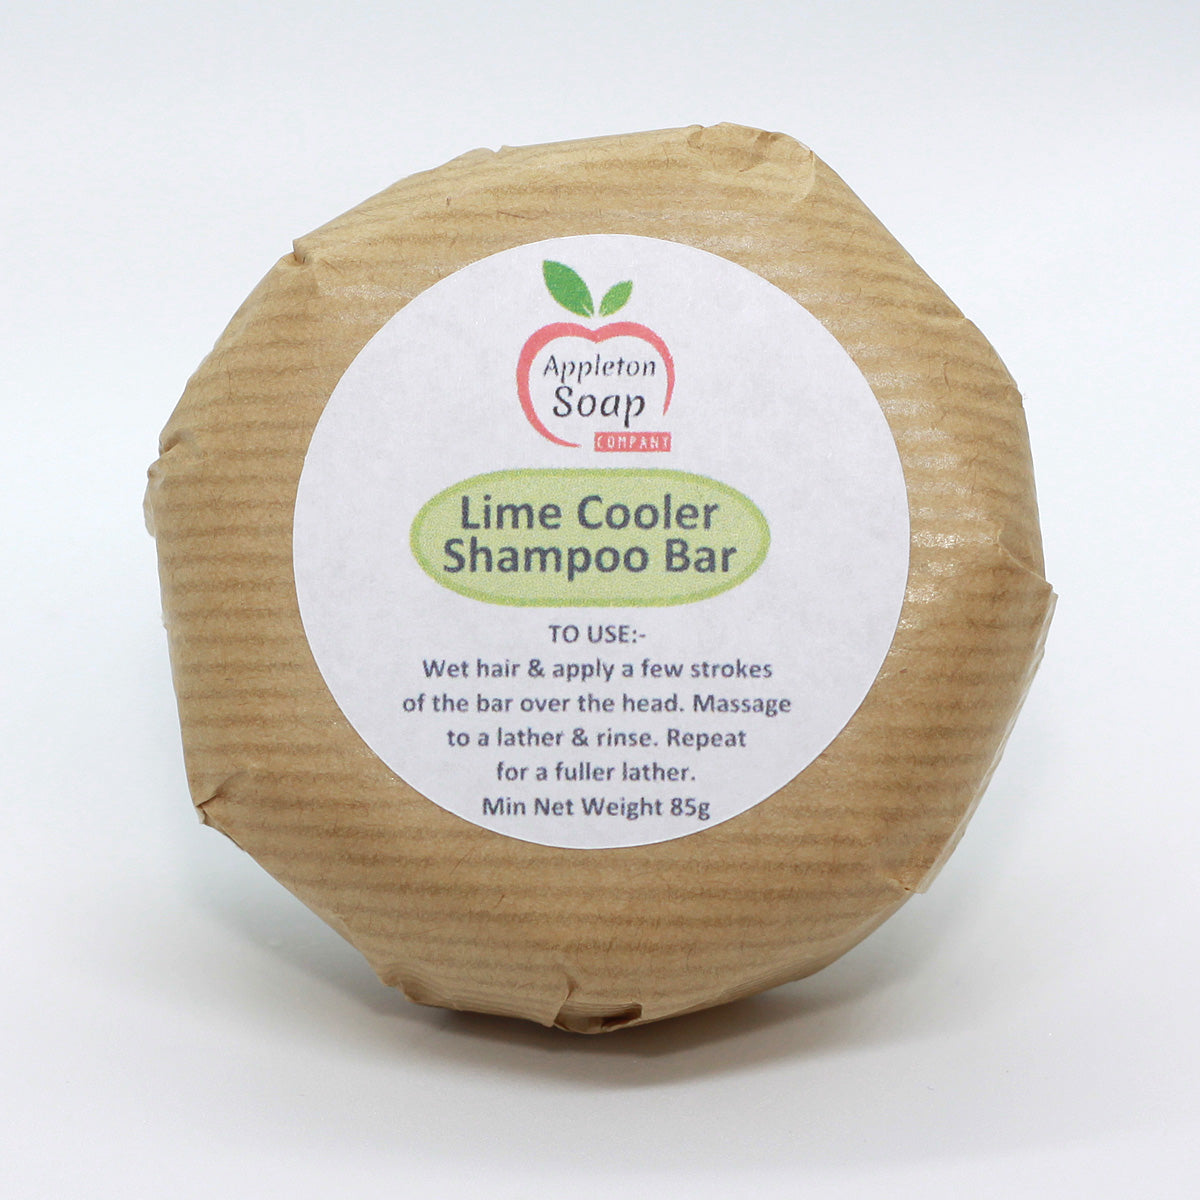 Lime cooler shampoo bar wrapped in brown paper with white label